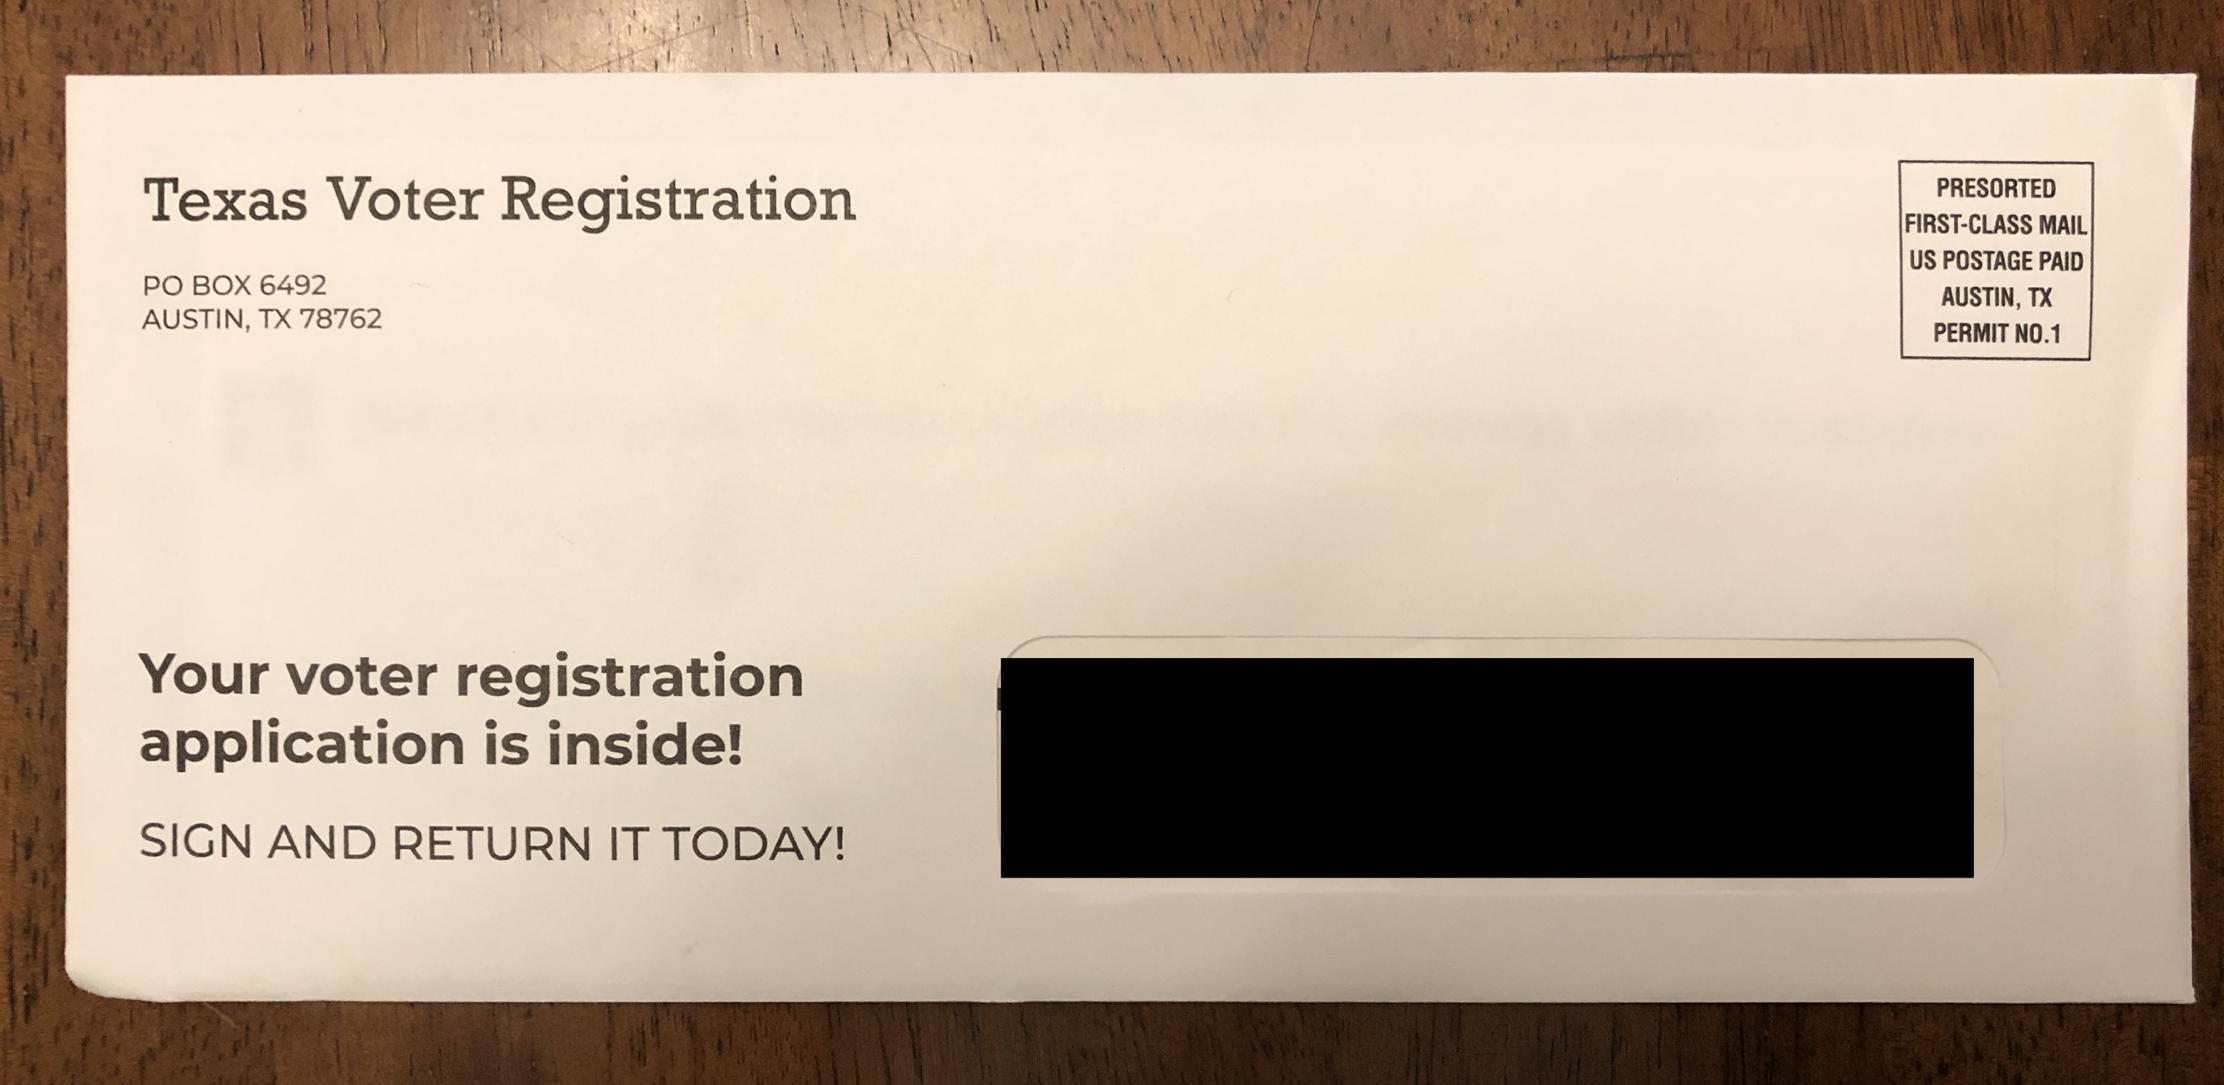 Wrongly delivered: Voter Registration: Texas Voter Registration wrongly delivered. Probably junk mail.; United States Postal Service; USPS; mail-in ballots; vote by mail